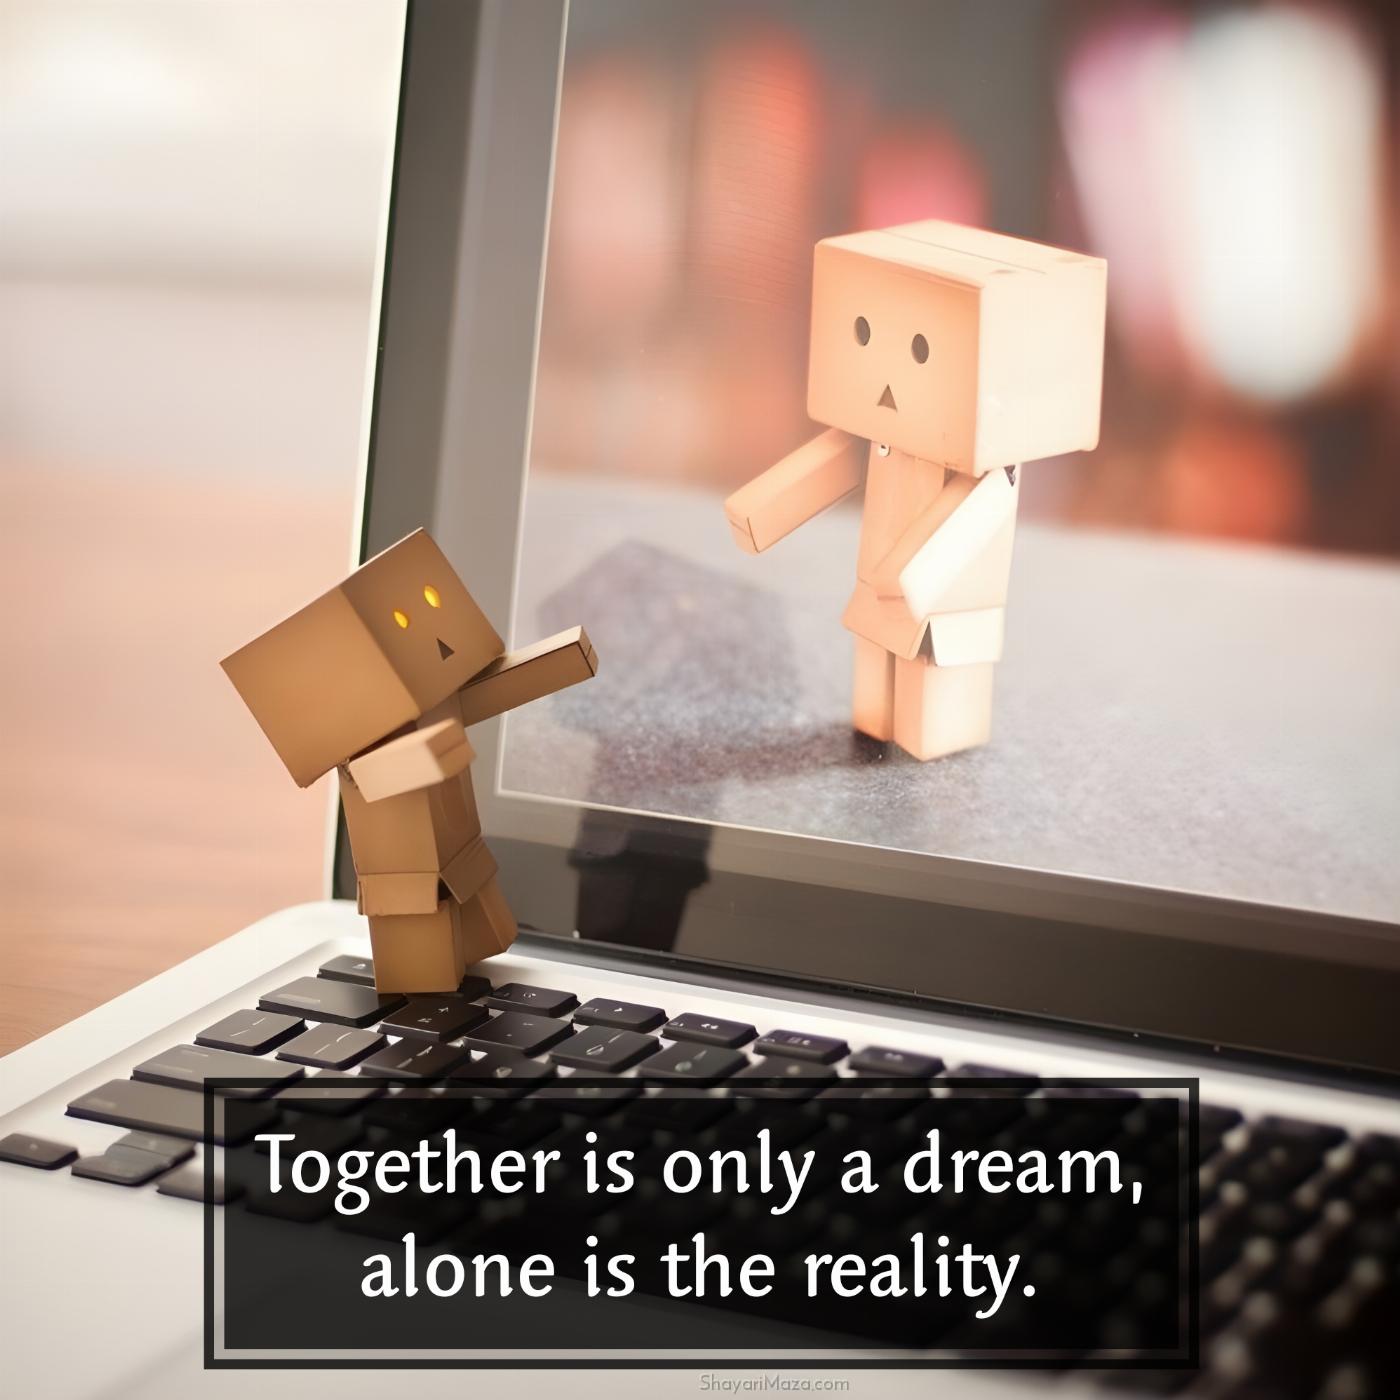 Together is only a dream alone is the reality